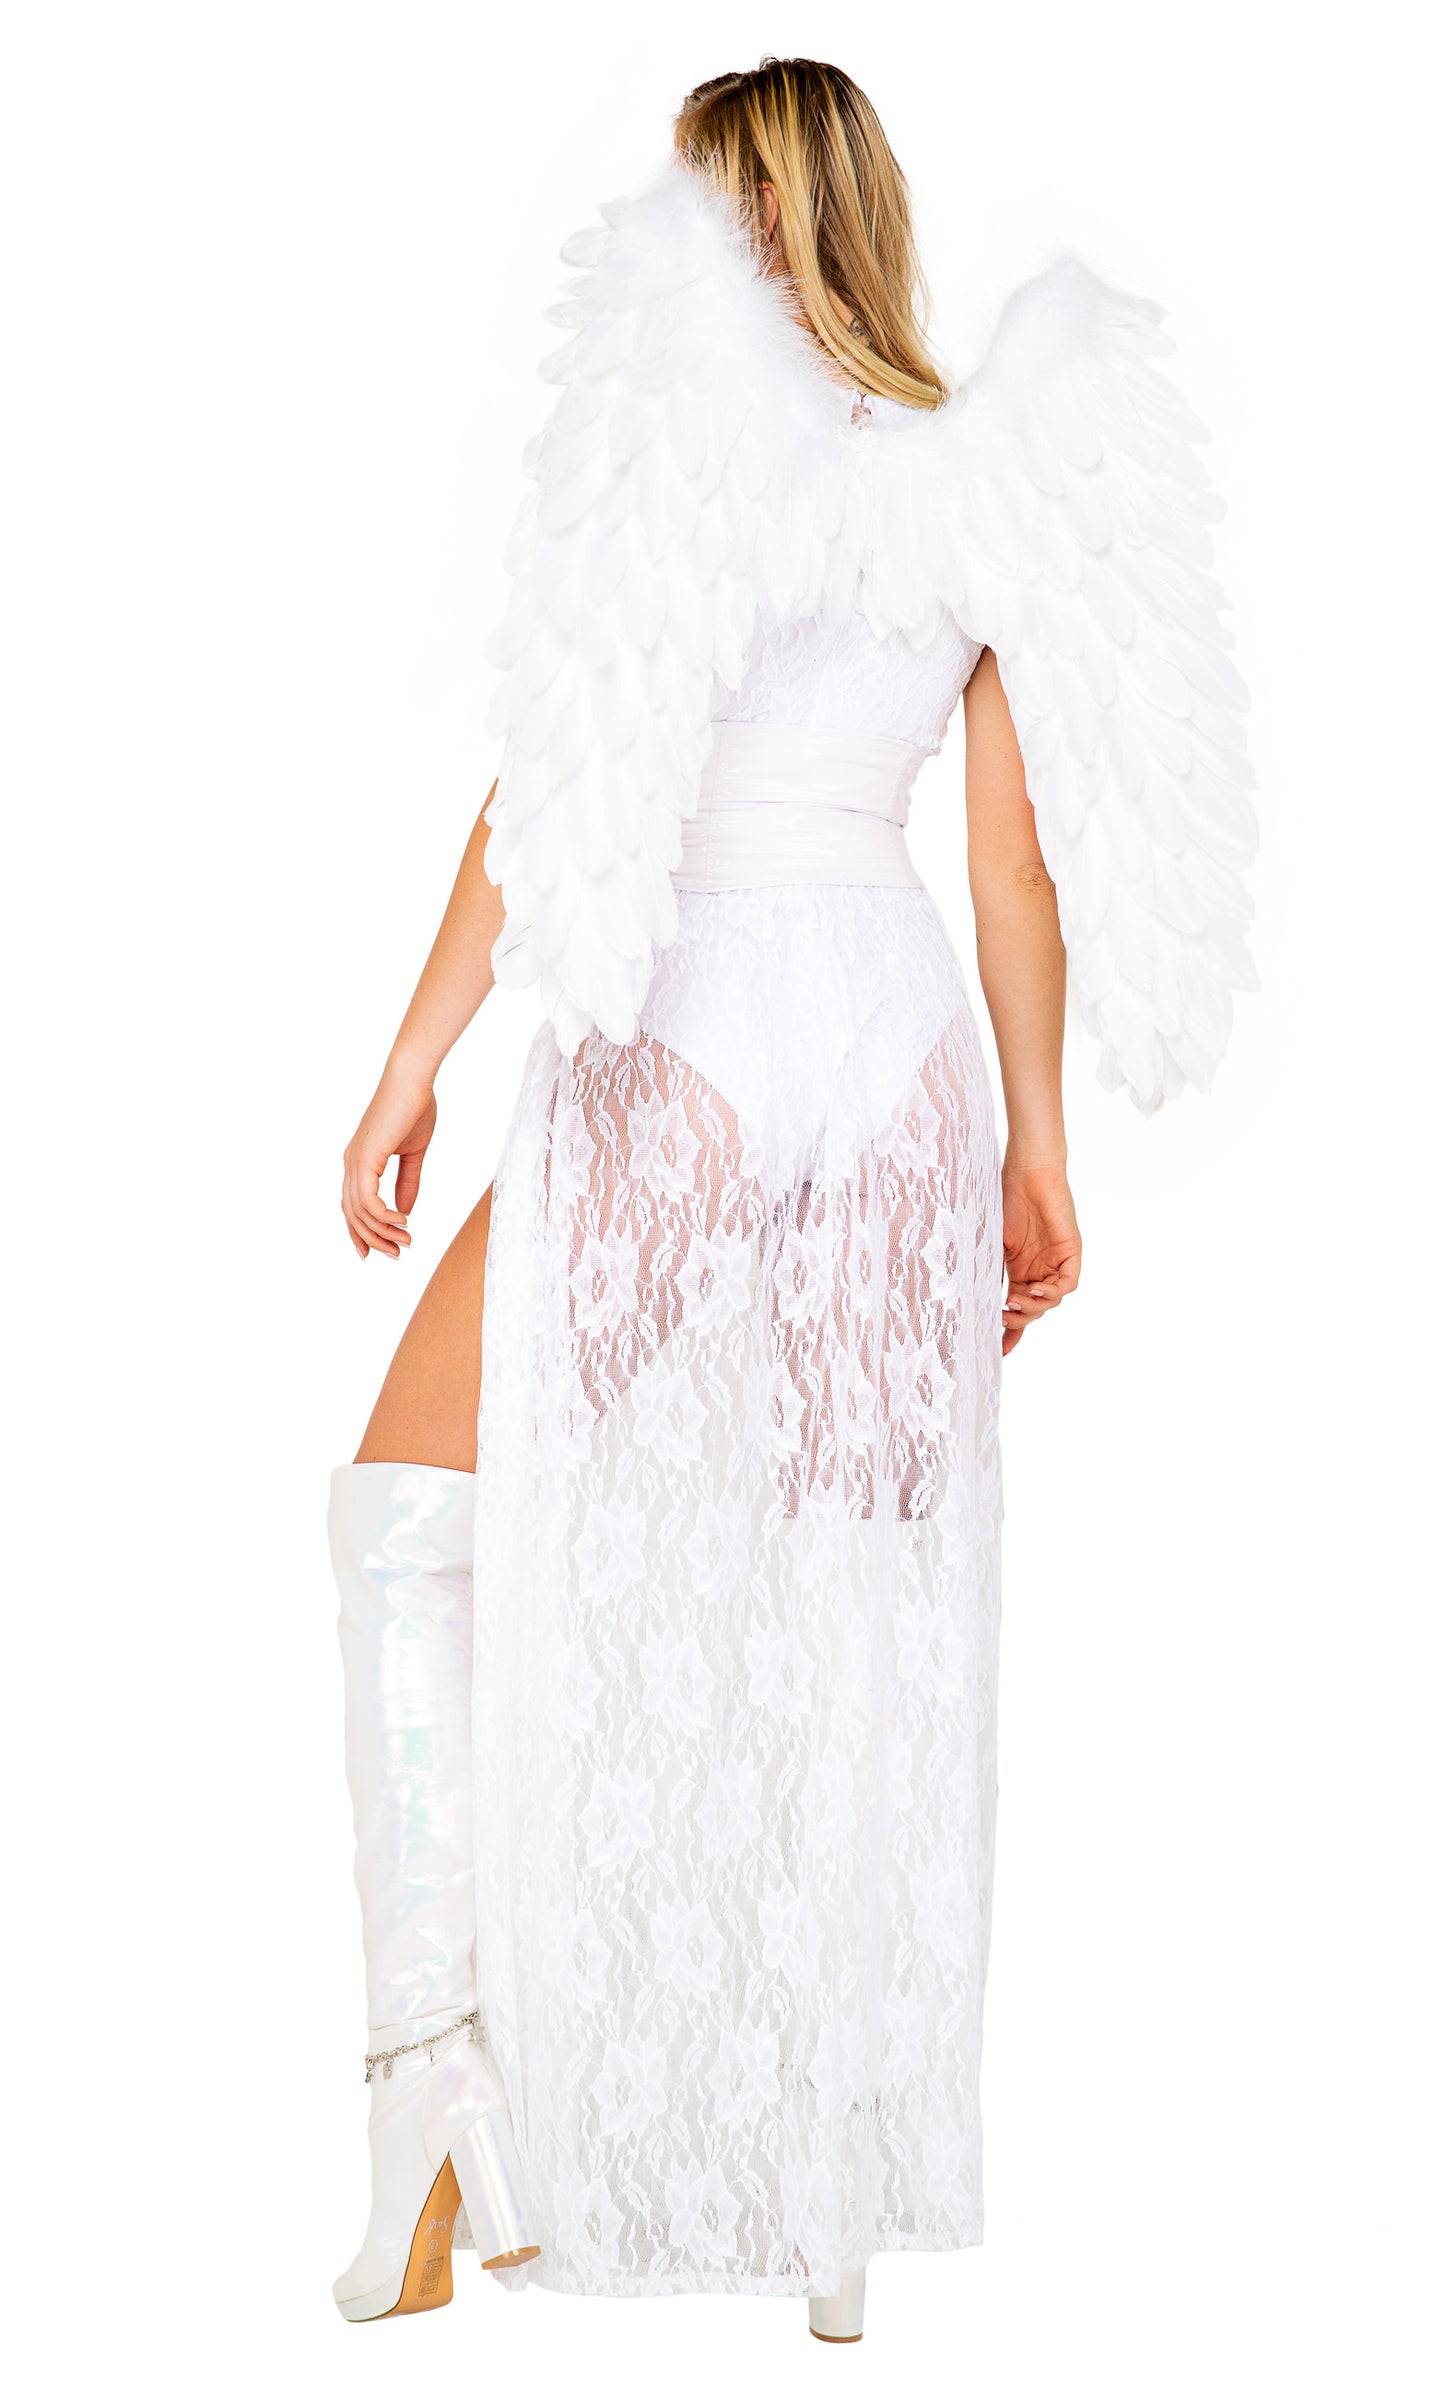 Deluxe Feathered White Wings by ROMA in One Size